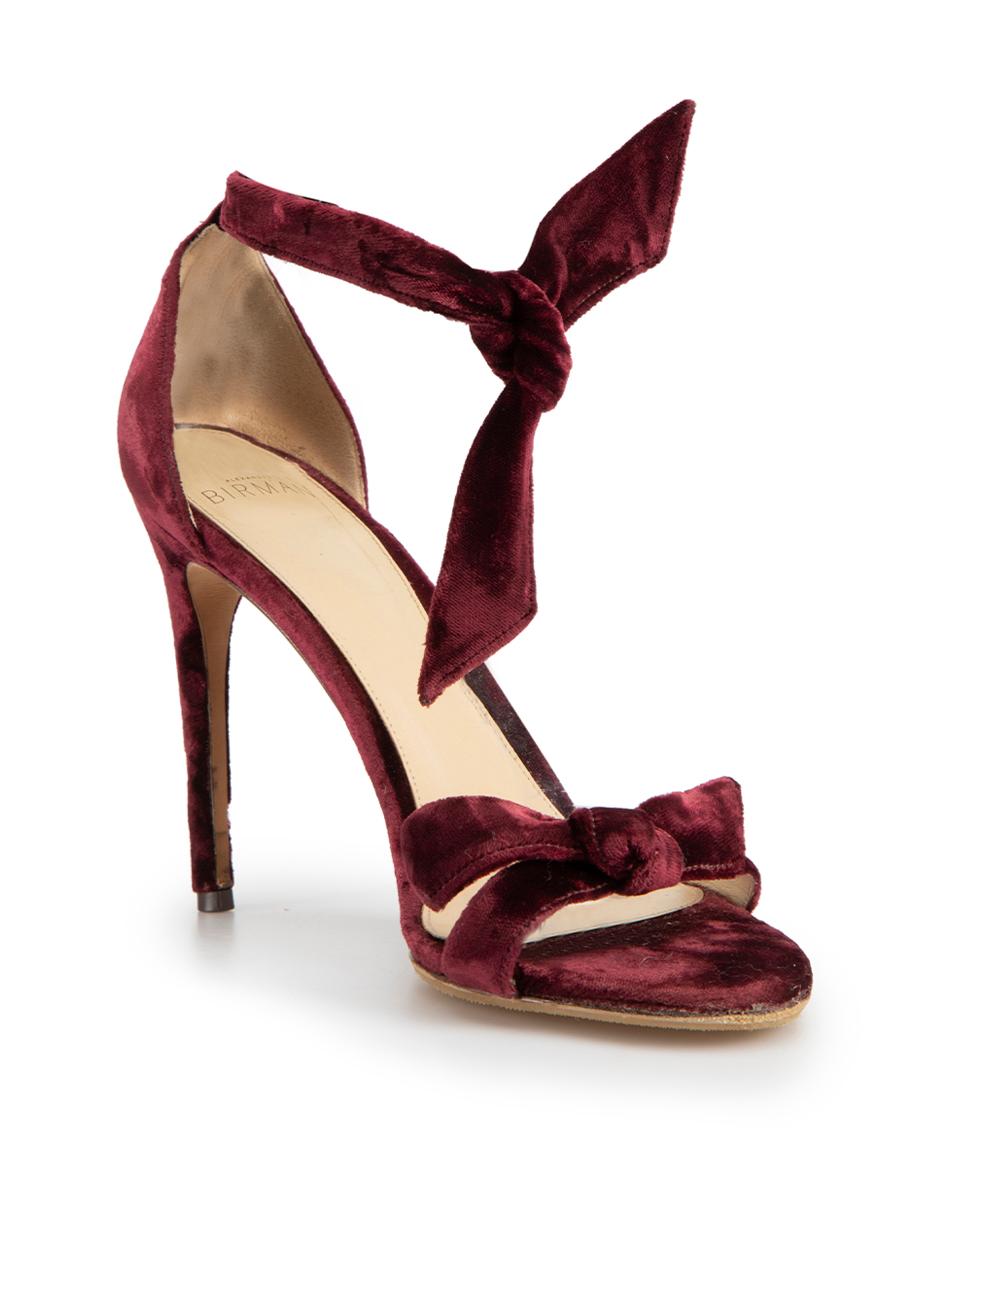 CONDITION is Very good. Minimal wear to shoes is evident. Minimal wear to both heel stems with scuff marks on this used Alexandre Birman designer resale item. These shoes come with original dust bag.



Details


Burgundy

Velvet

High heeled